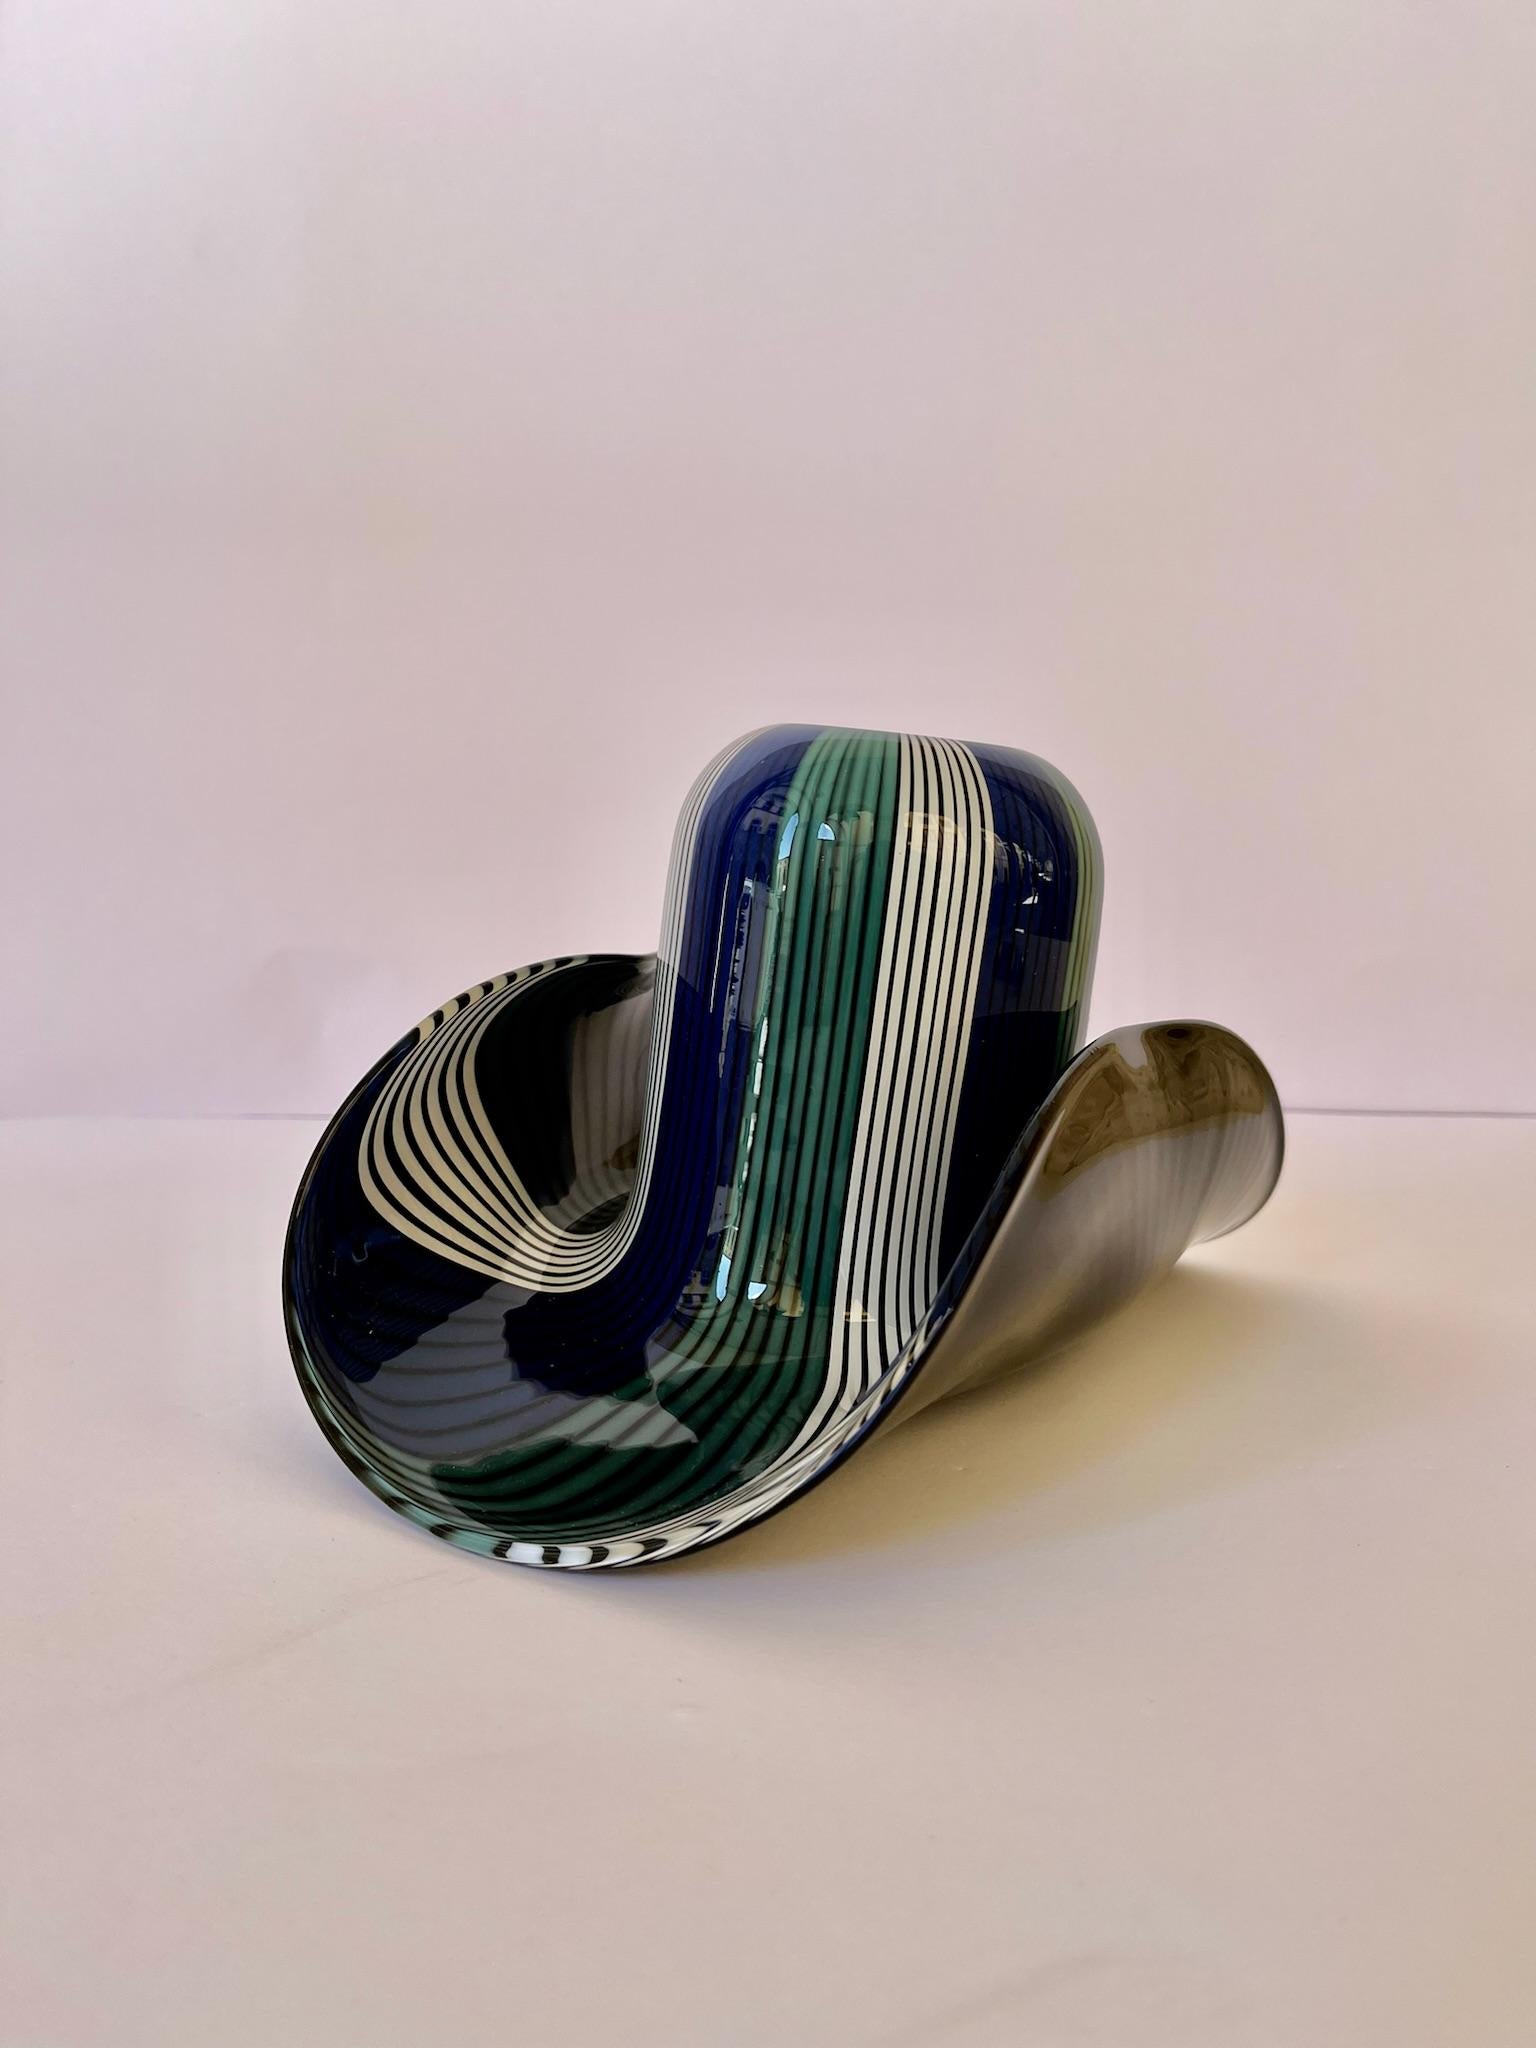 VeArt glass hat for Venini 1980.
This hat with the predominance of the color blue, white, and green is mainly used as a case if it is leaned in the smaller base and instead used as a decorative object in the larger base. However, it remains a vase